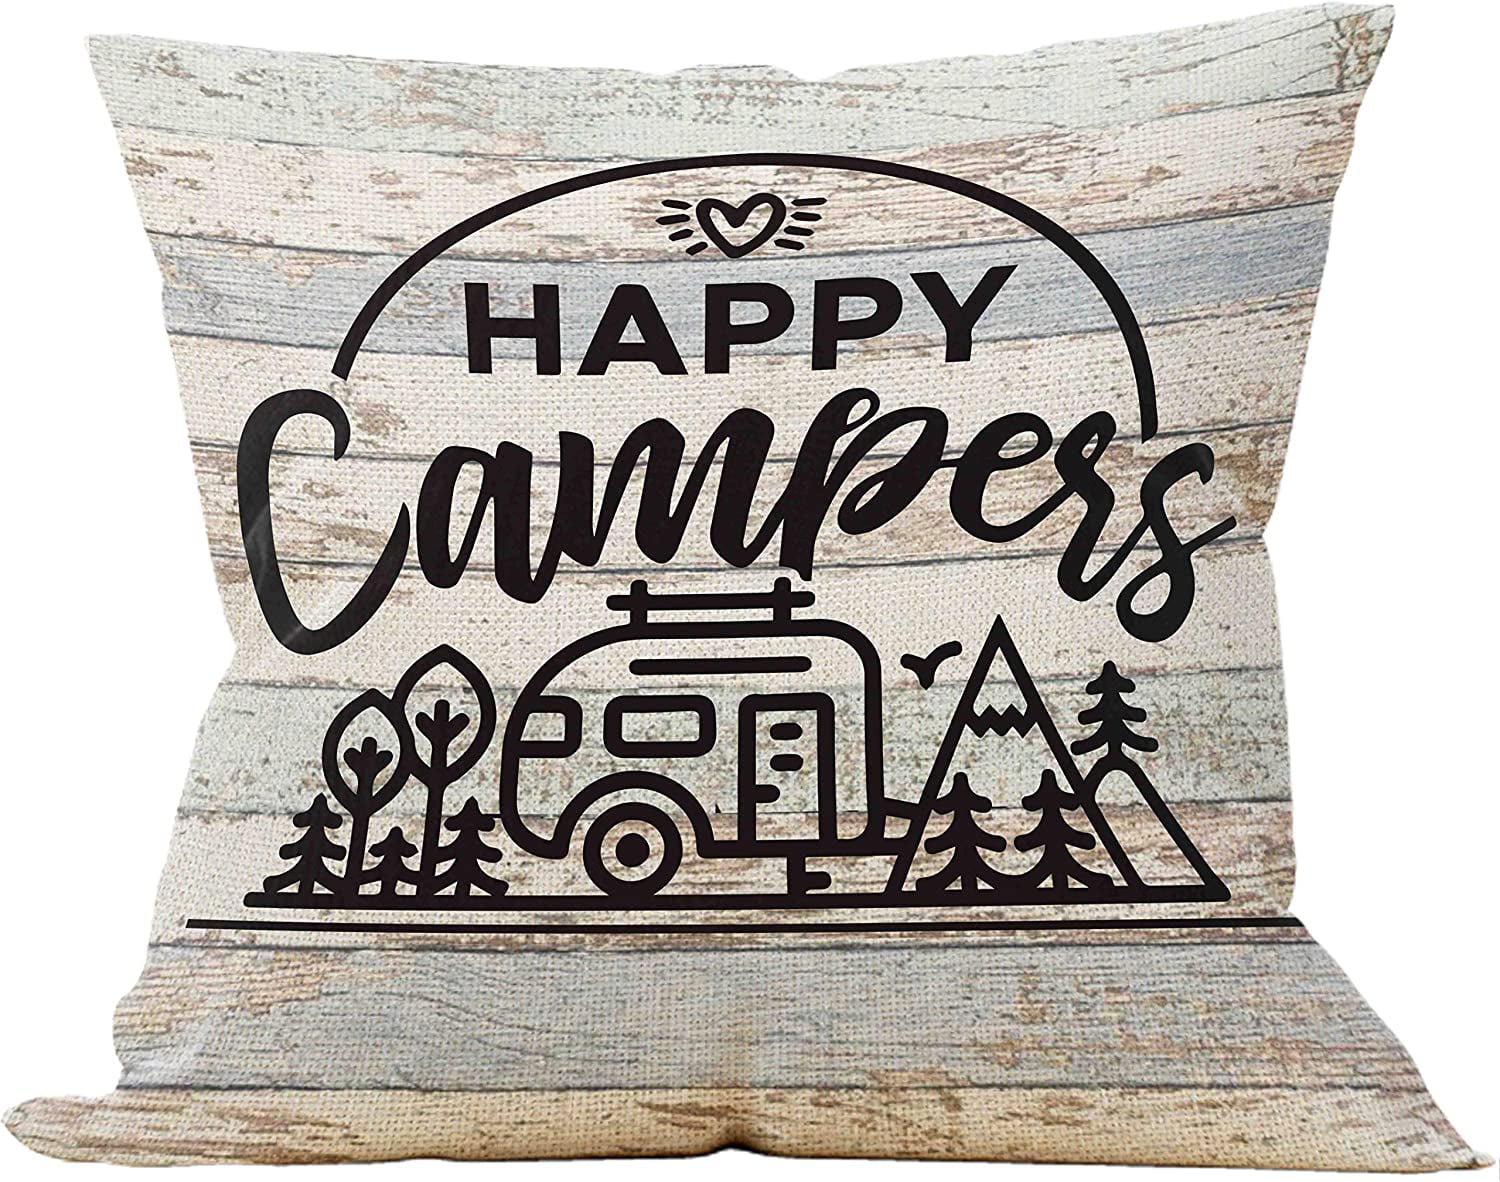 Happy Campers Decor Cotton Linen Cushion Cover Throw Pillow Case Home Decor NEW 